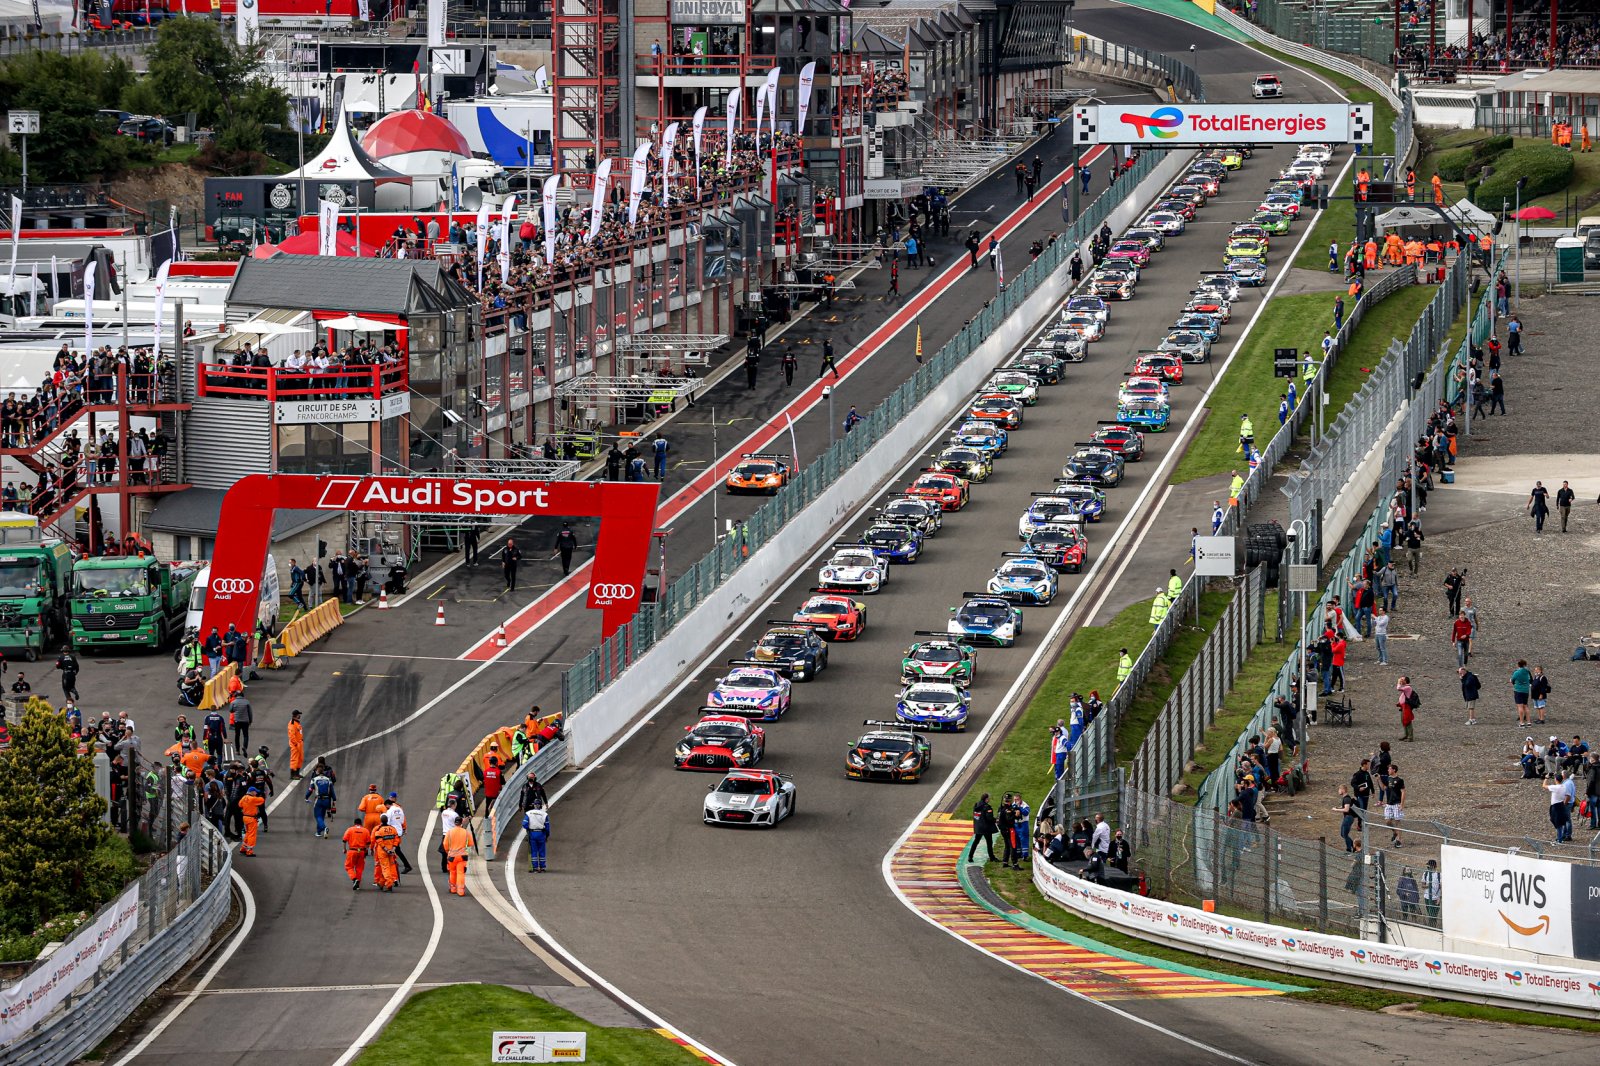 The 2021 TotalEnergies 24 Hours of Spa in facts and figures